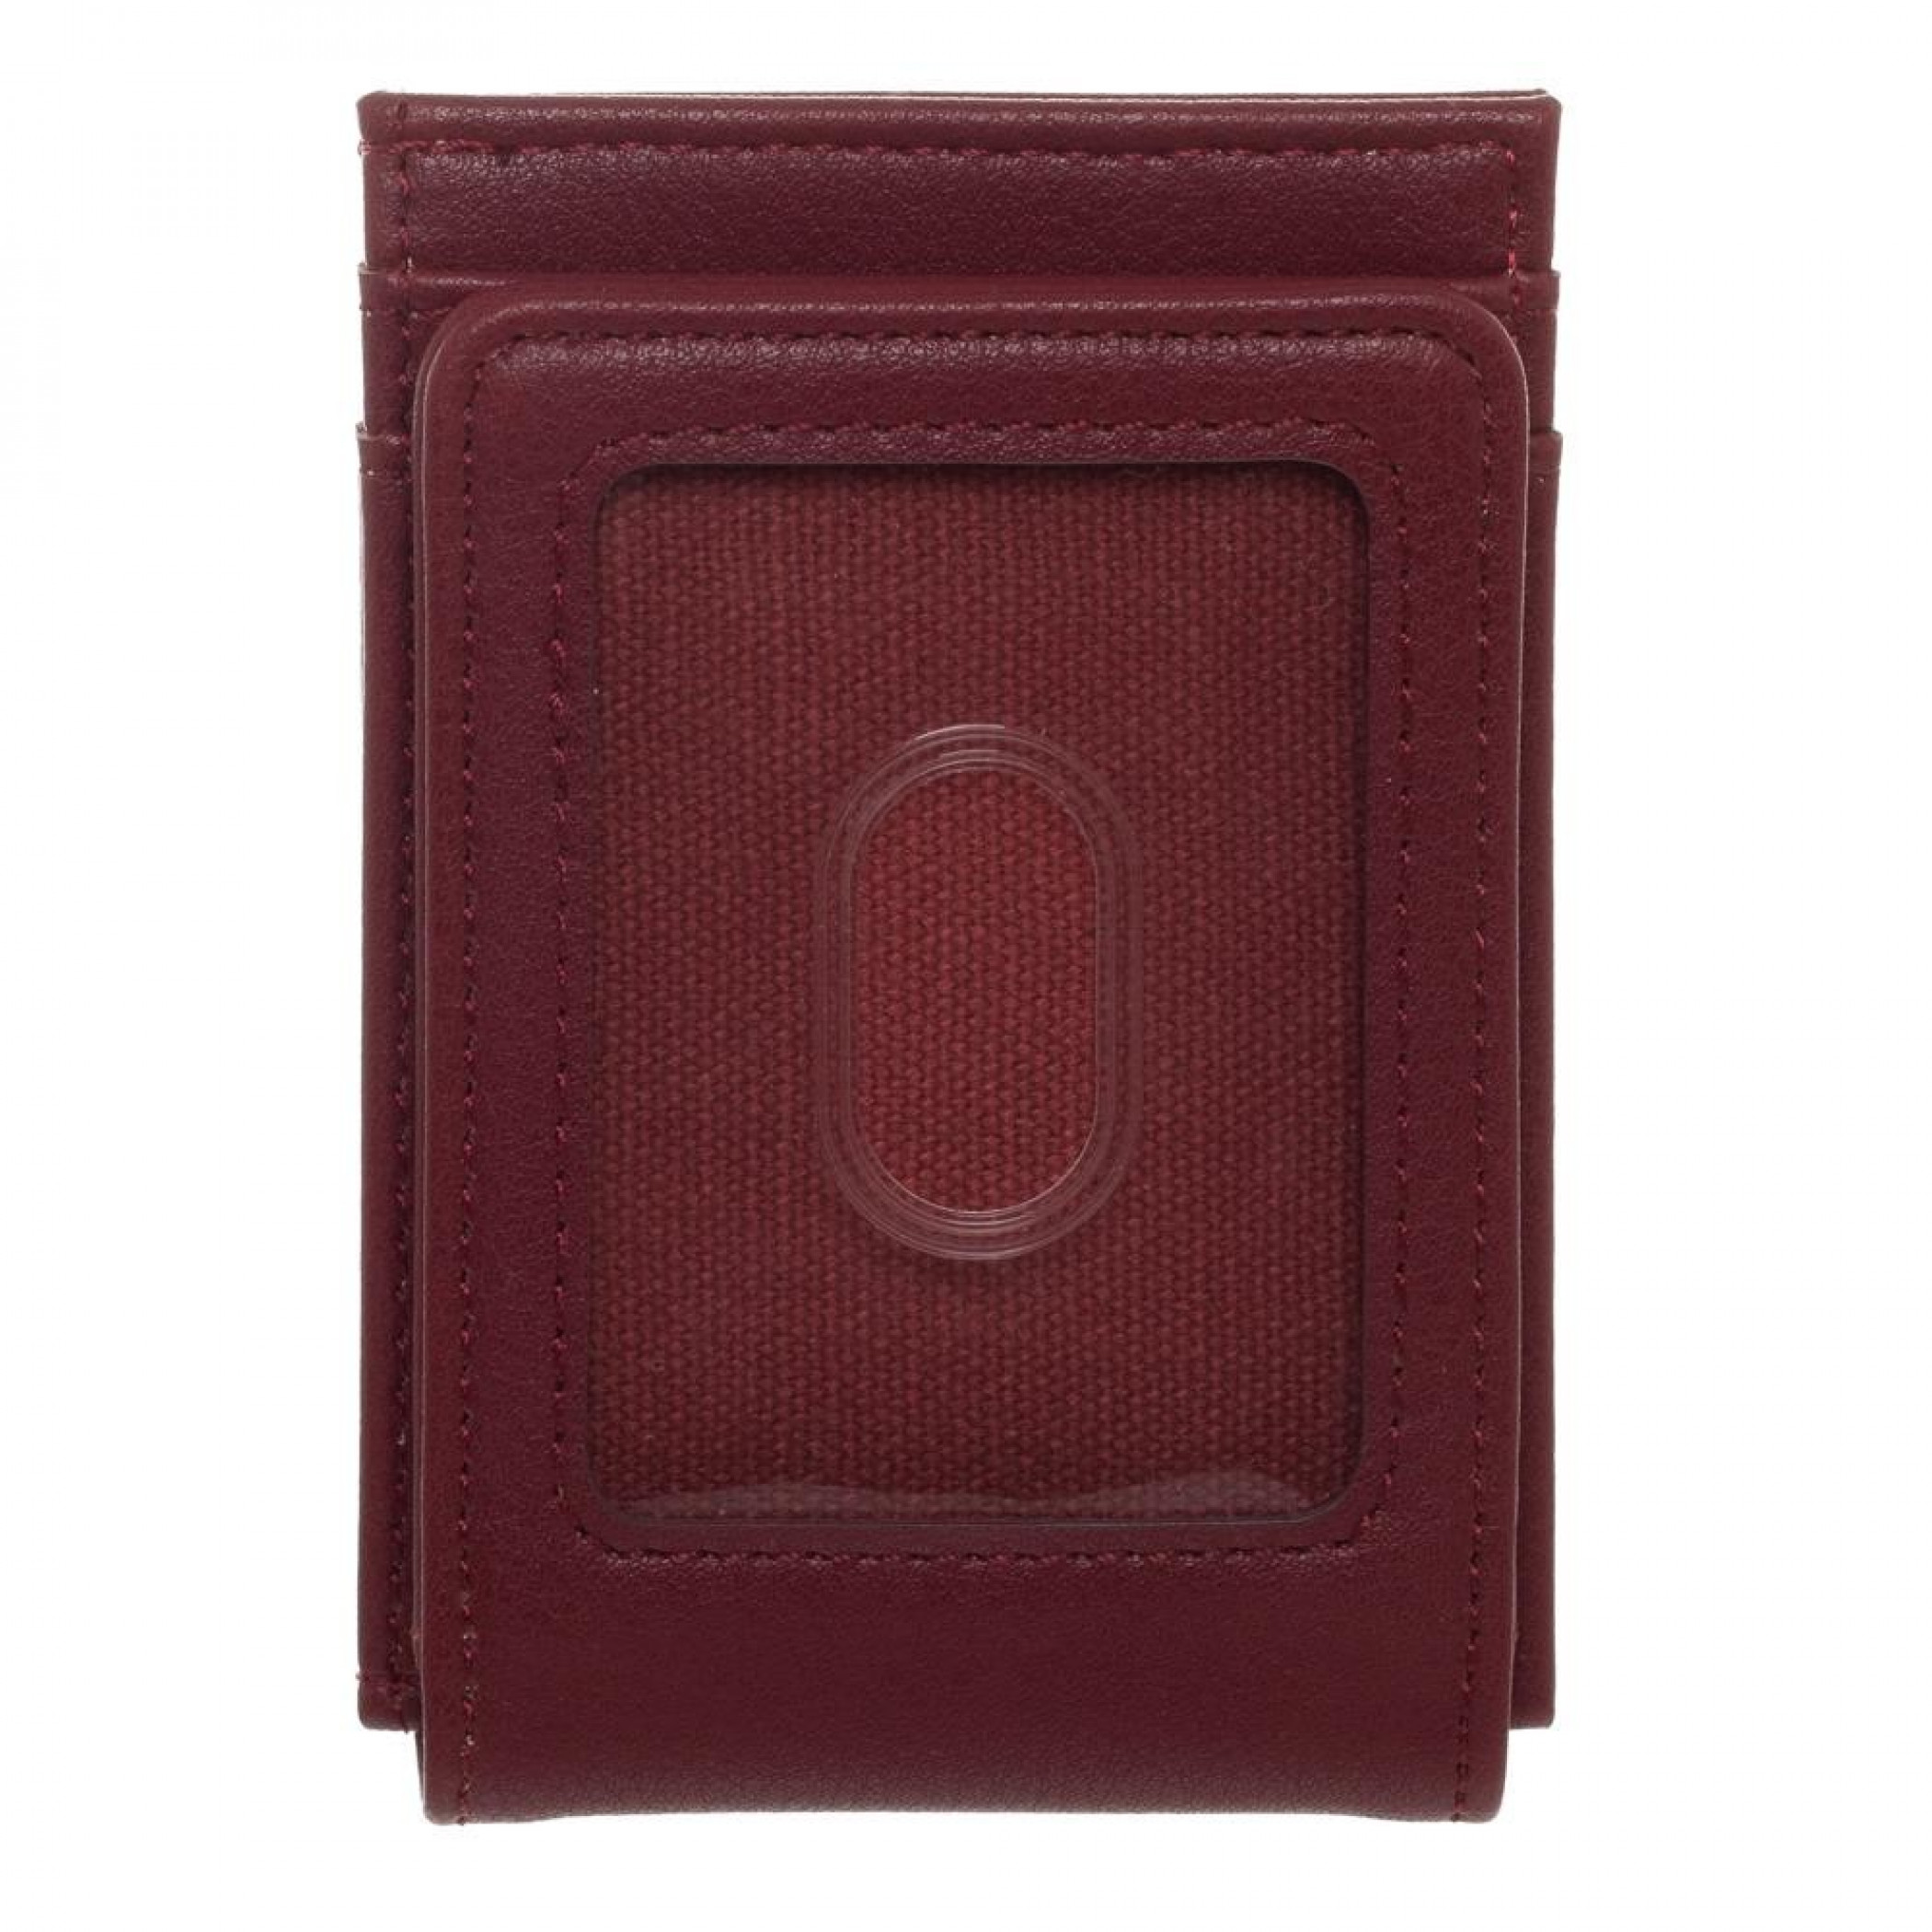 The Flash Magnetic ID Clip Card Holder Wallet